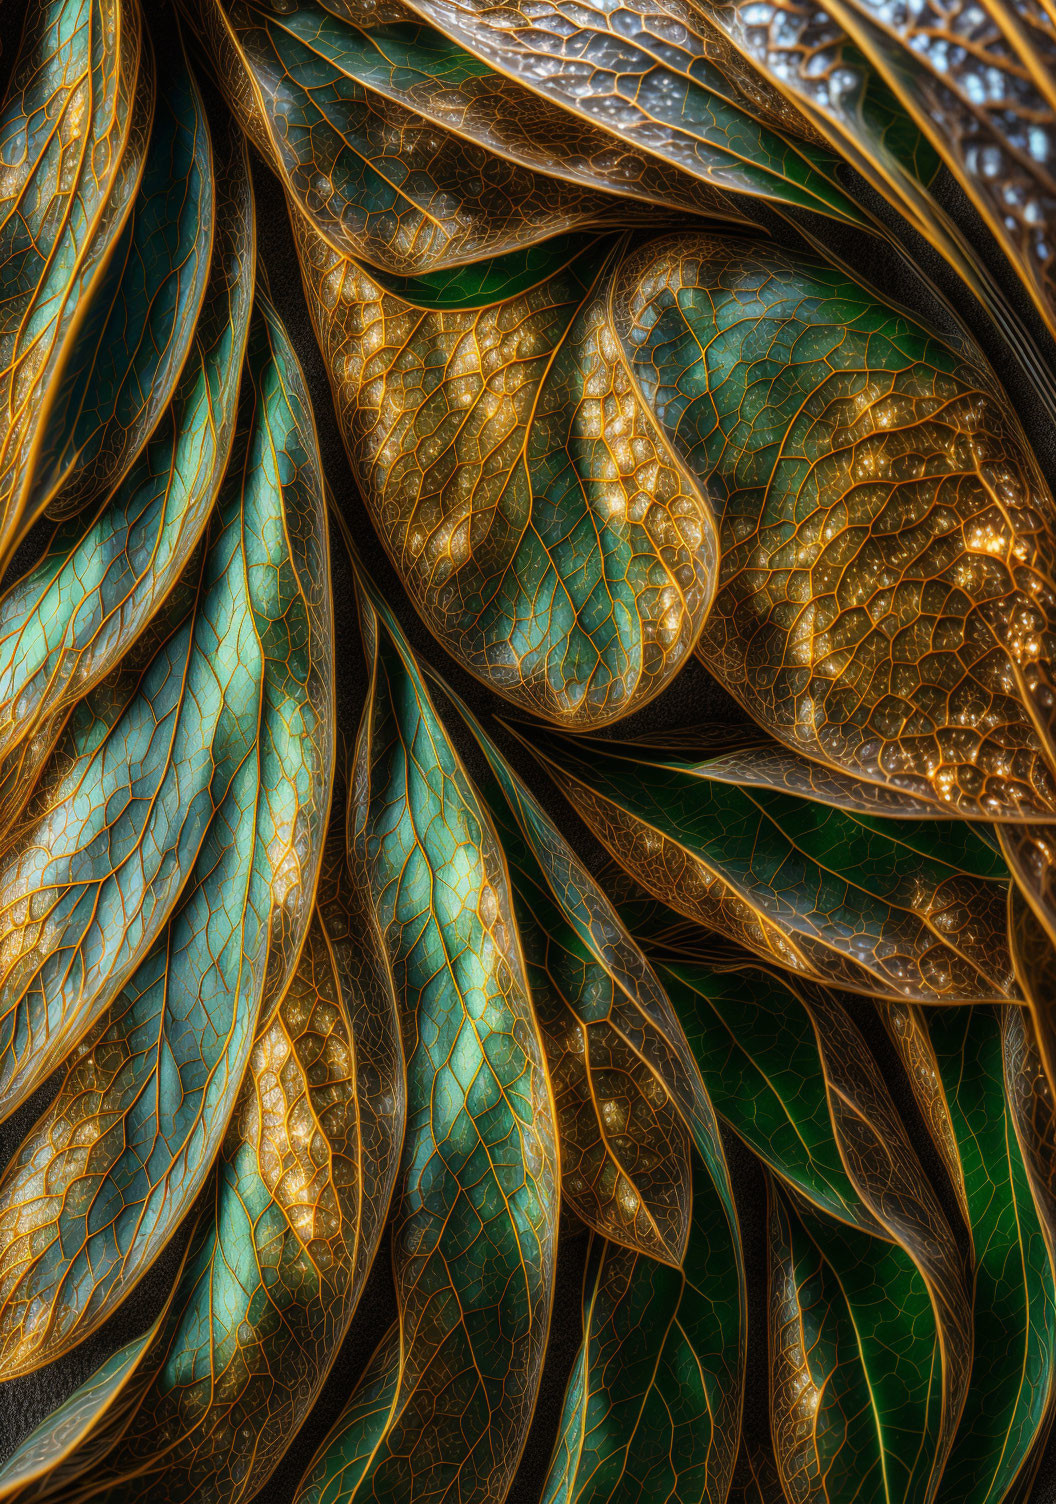 Detailed Close-Up of Overlapping Leaf Veins in Green and Gold Textures